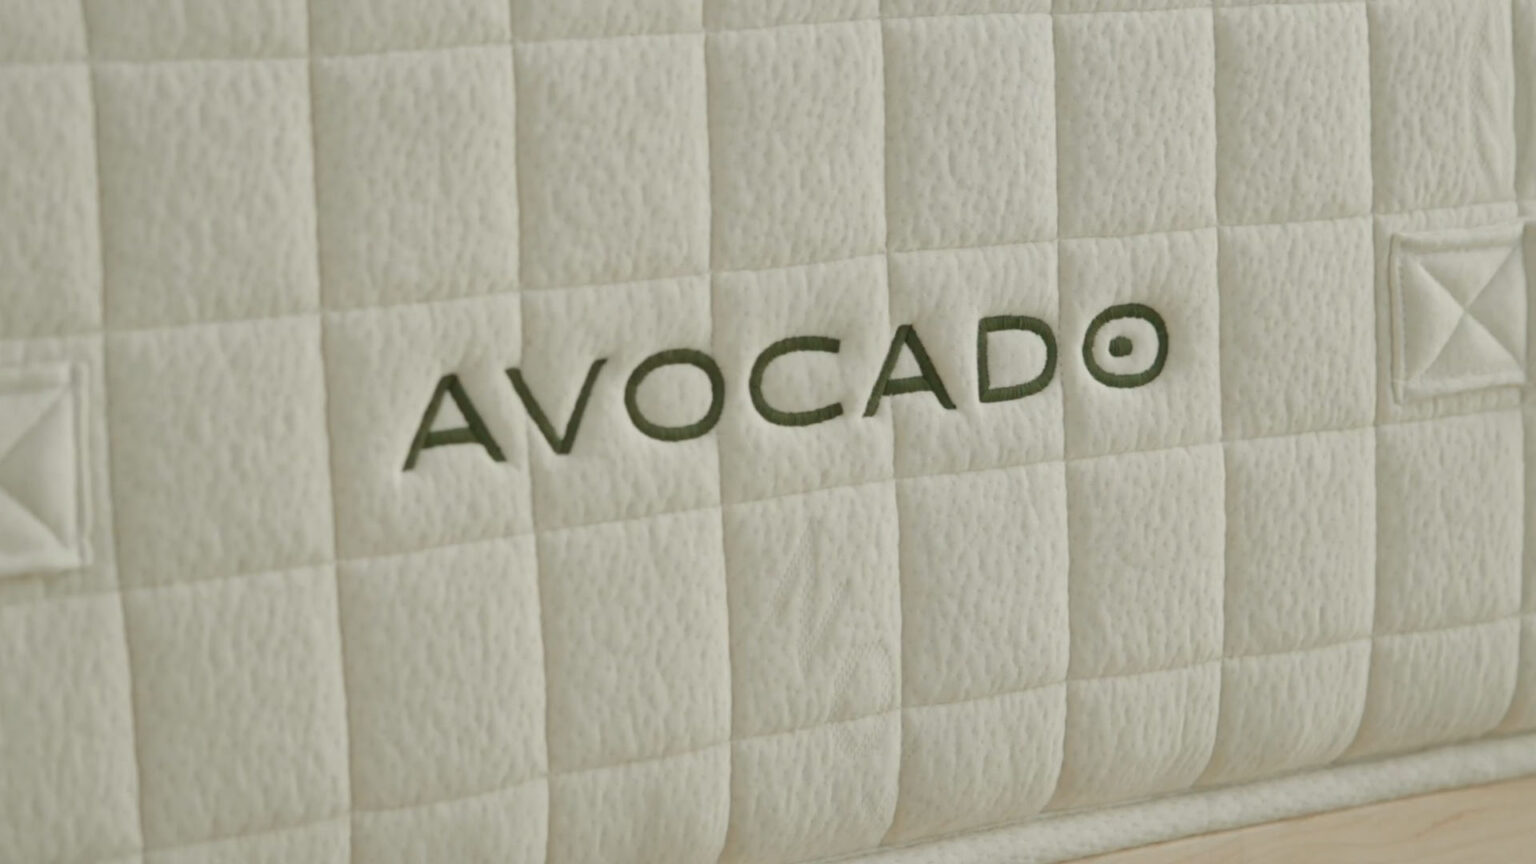 Avocado Mattress delivers to Irving